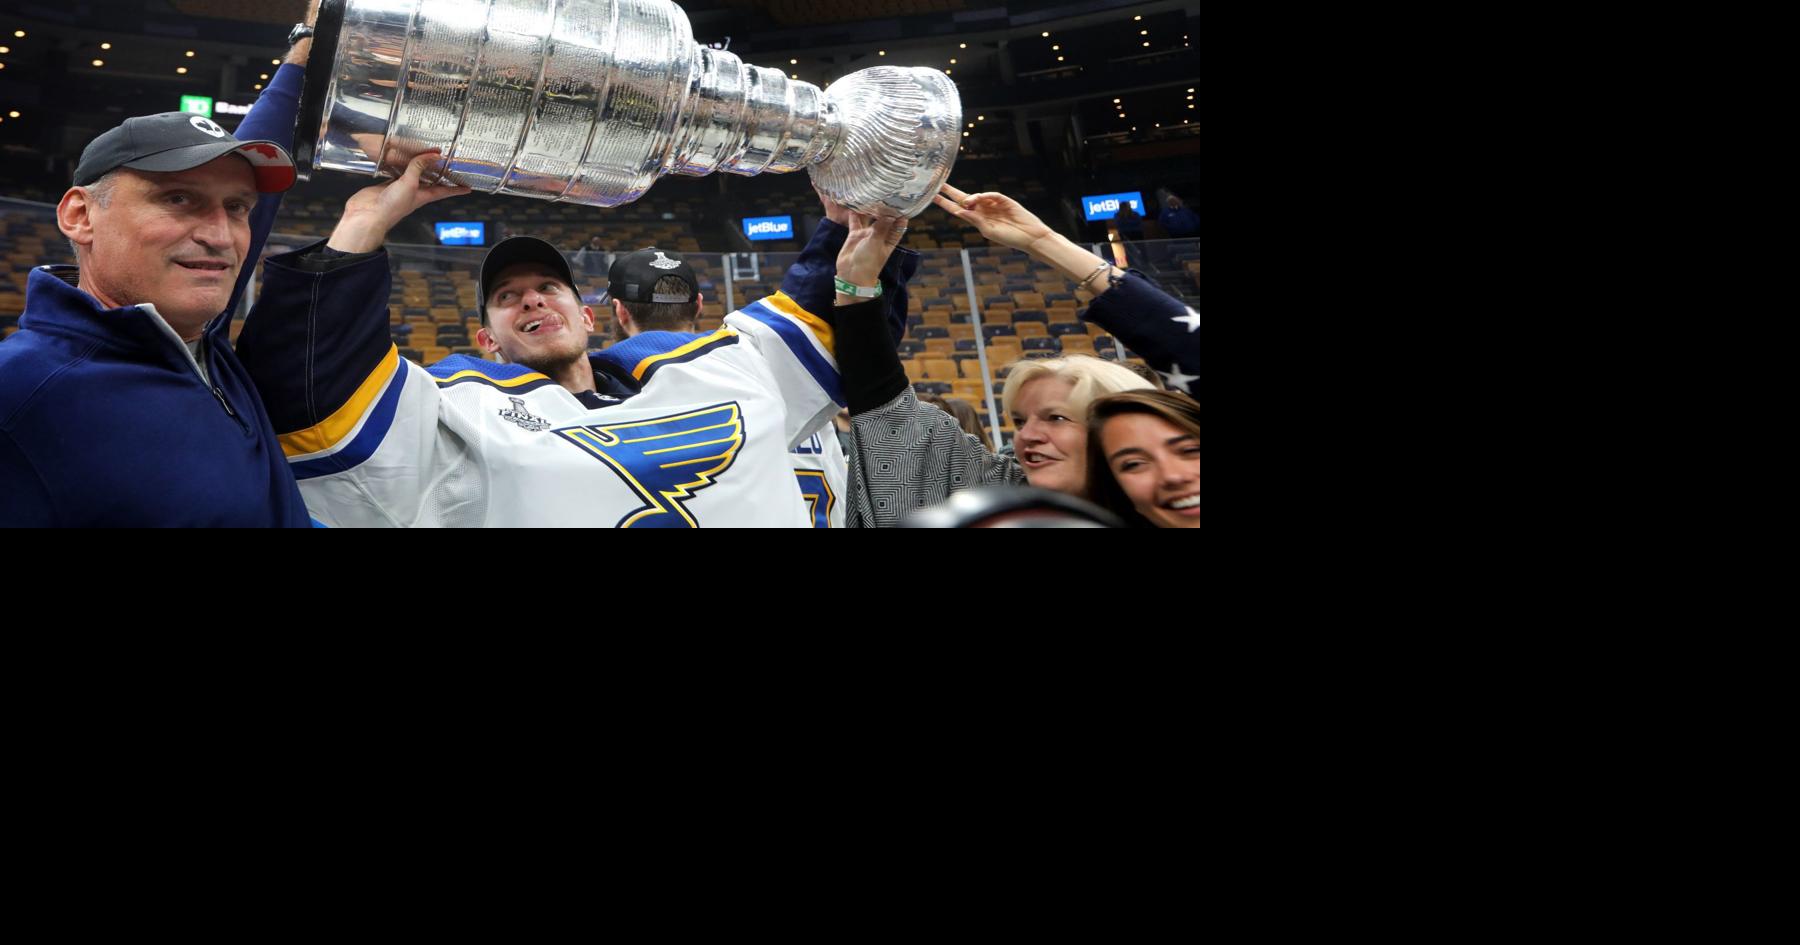 St. Louis Blues - Luke Schenn had to fake lifting the Cup 